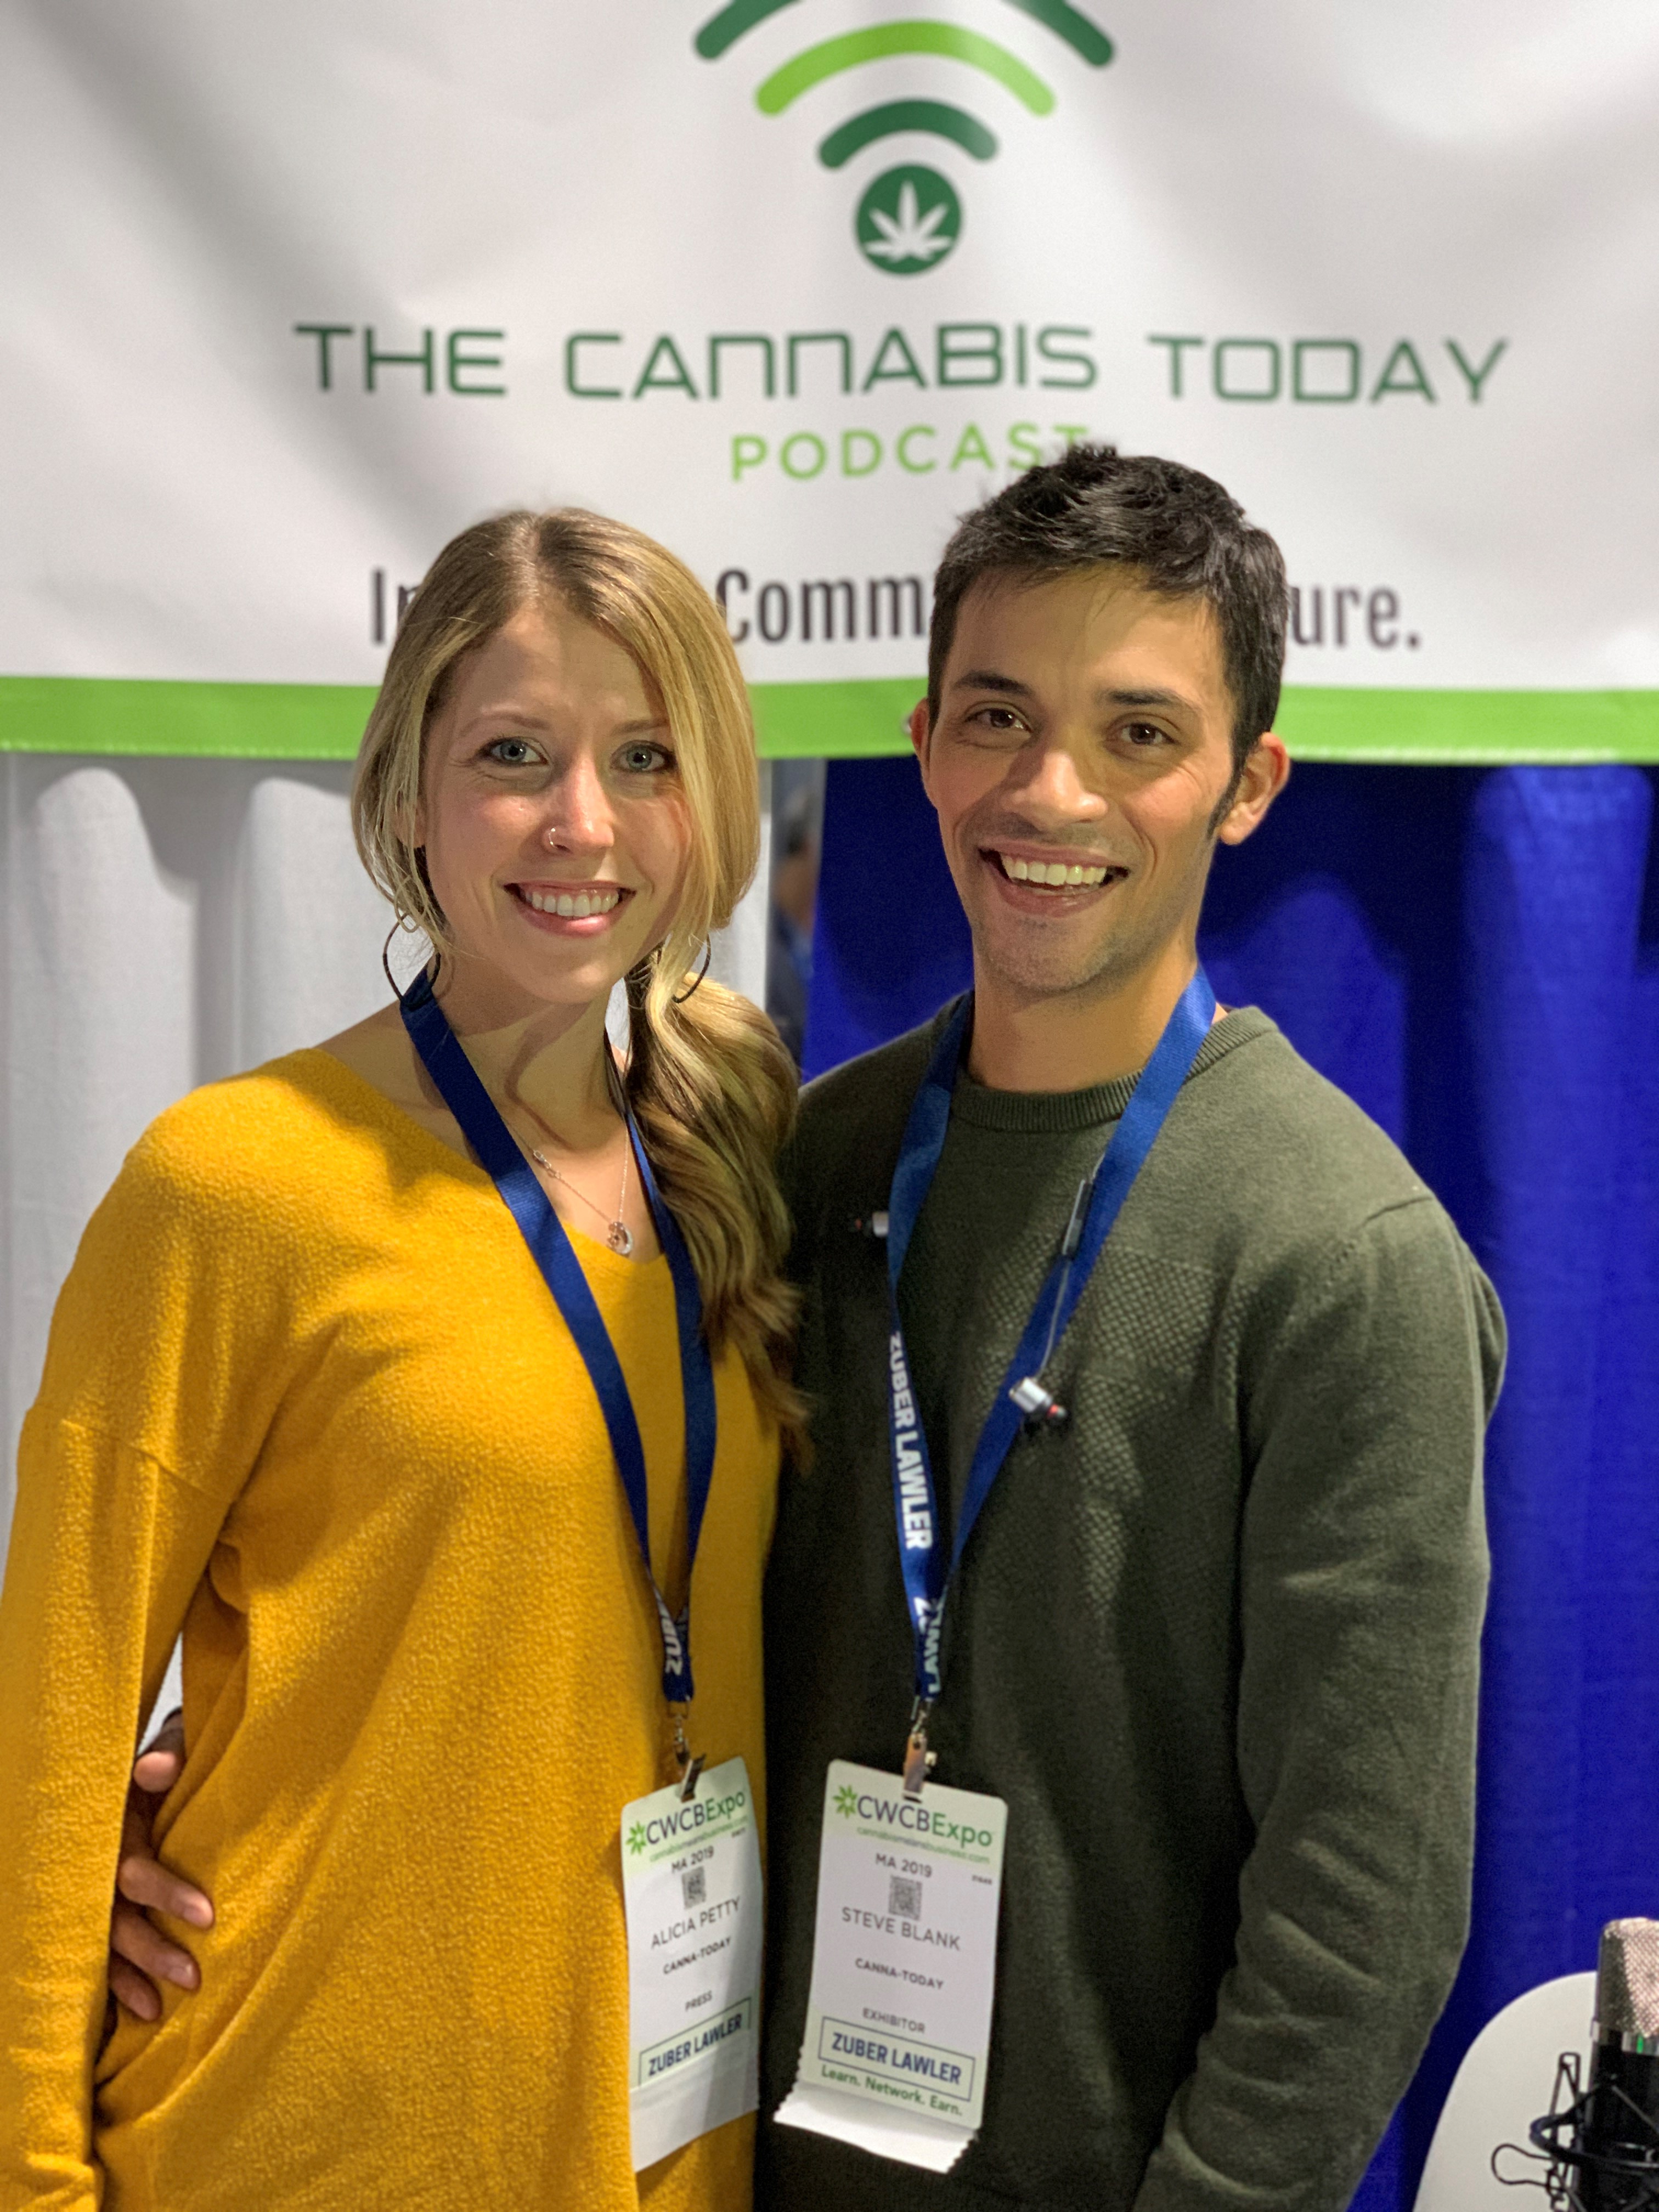 The Cannabis Today Podcast